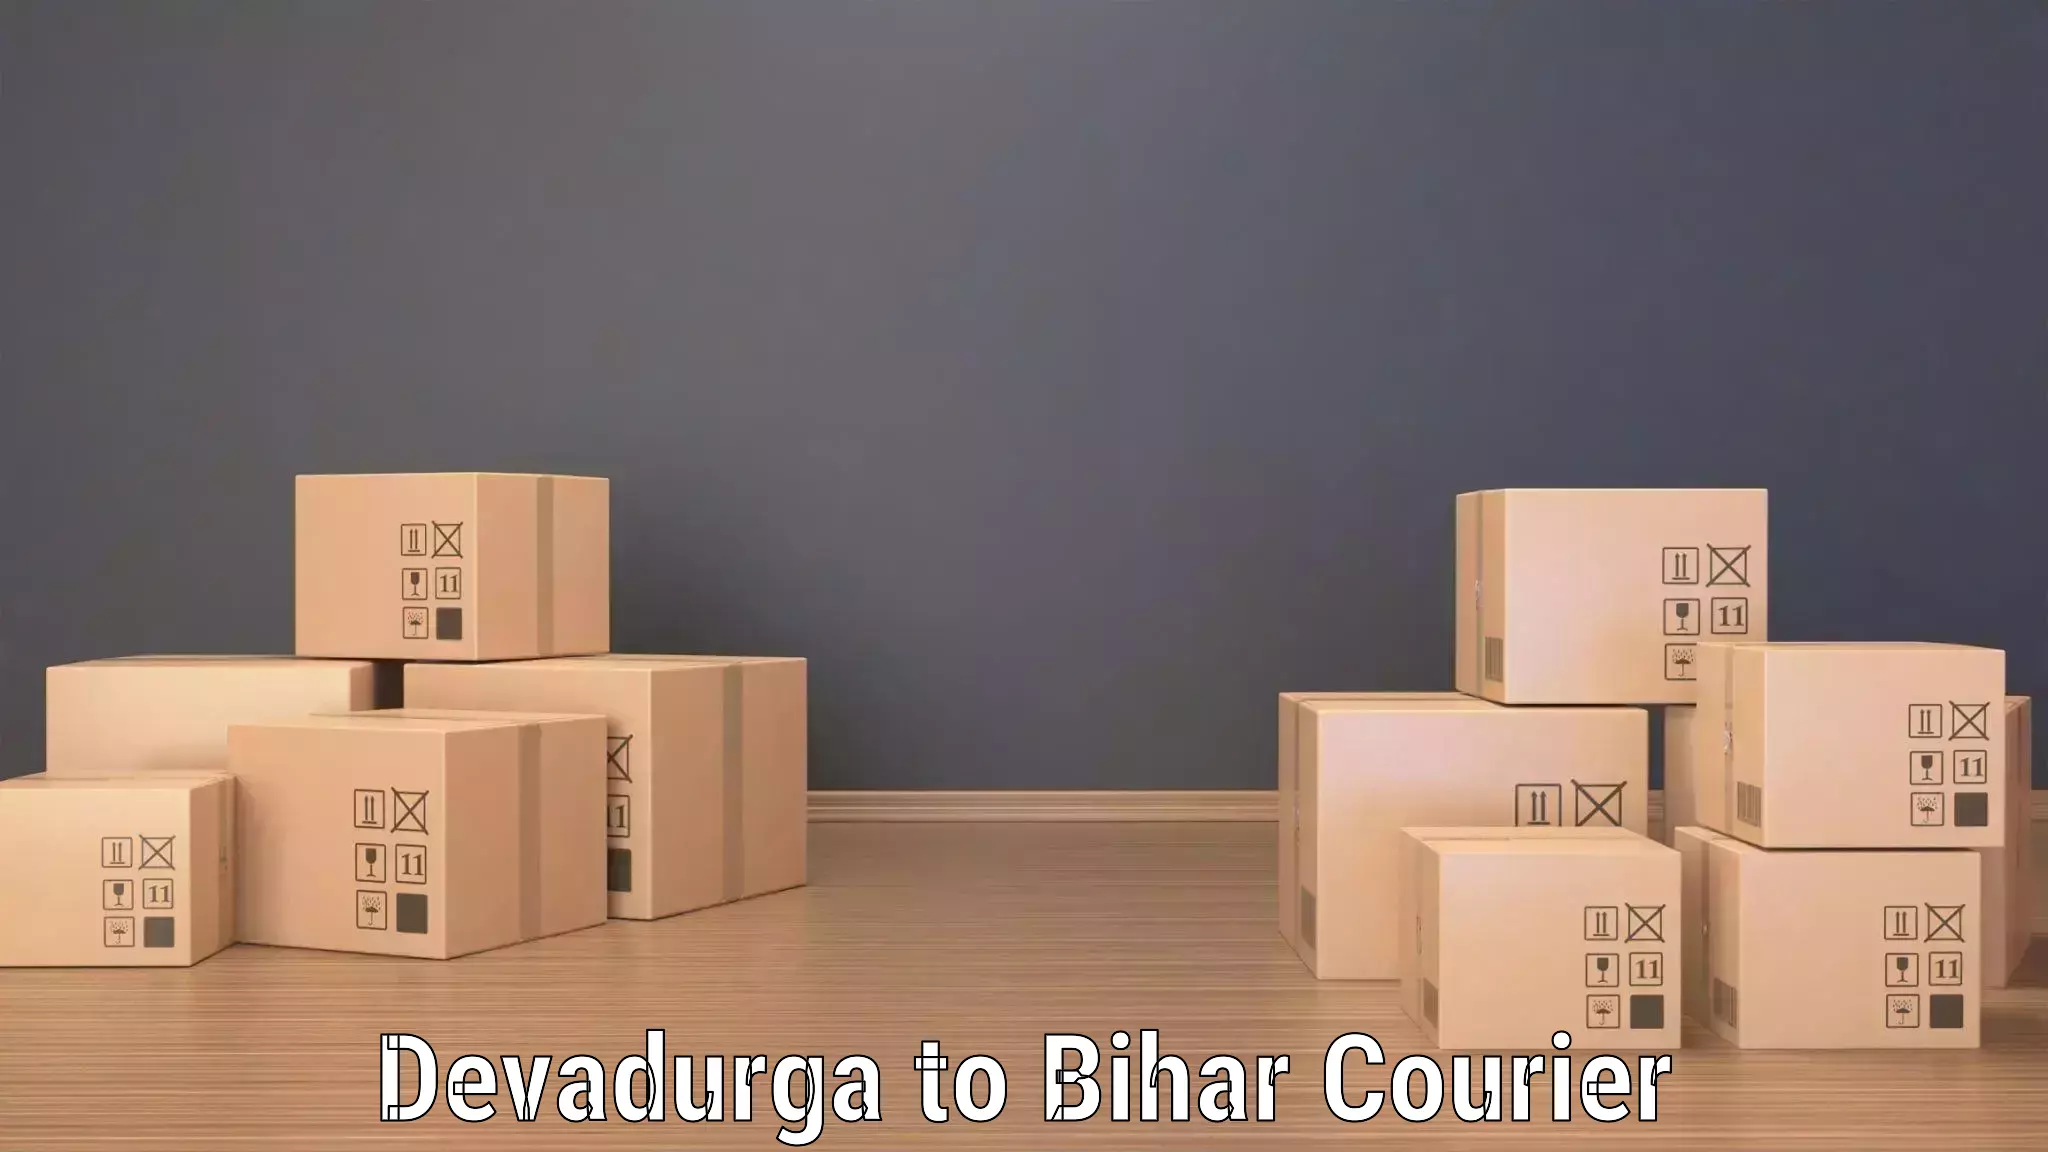 Express package delivery in Devadurga to Rajgir